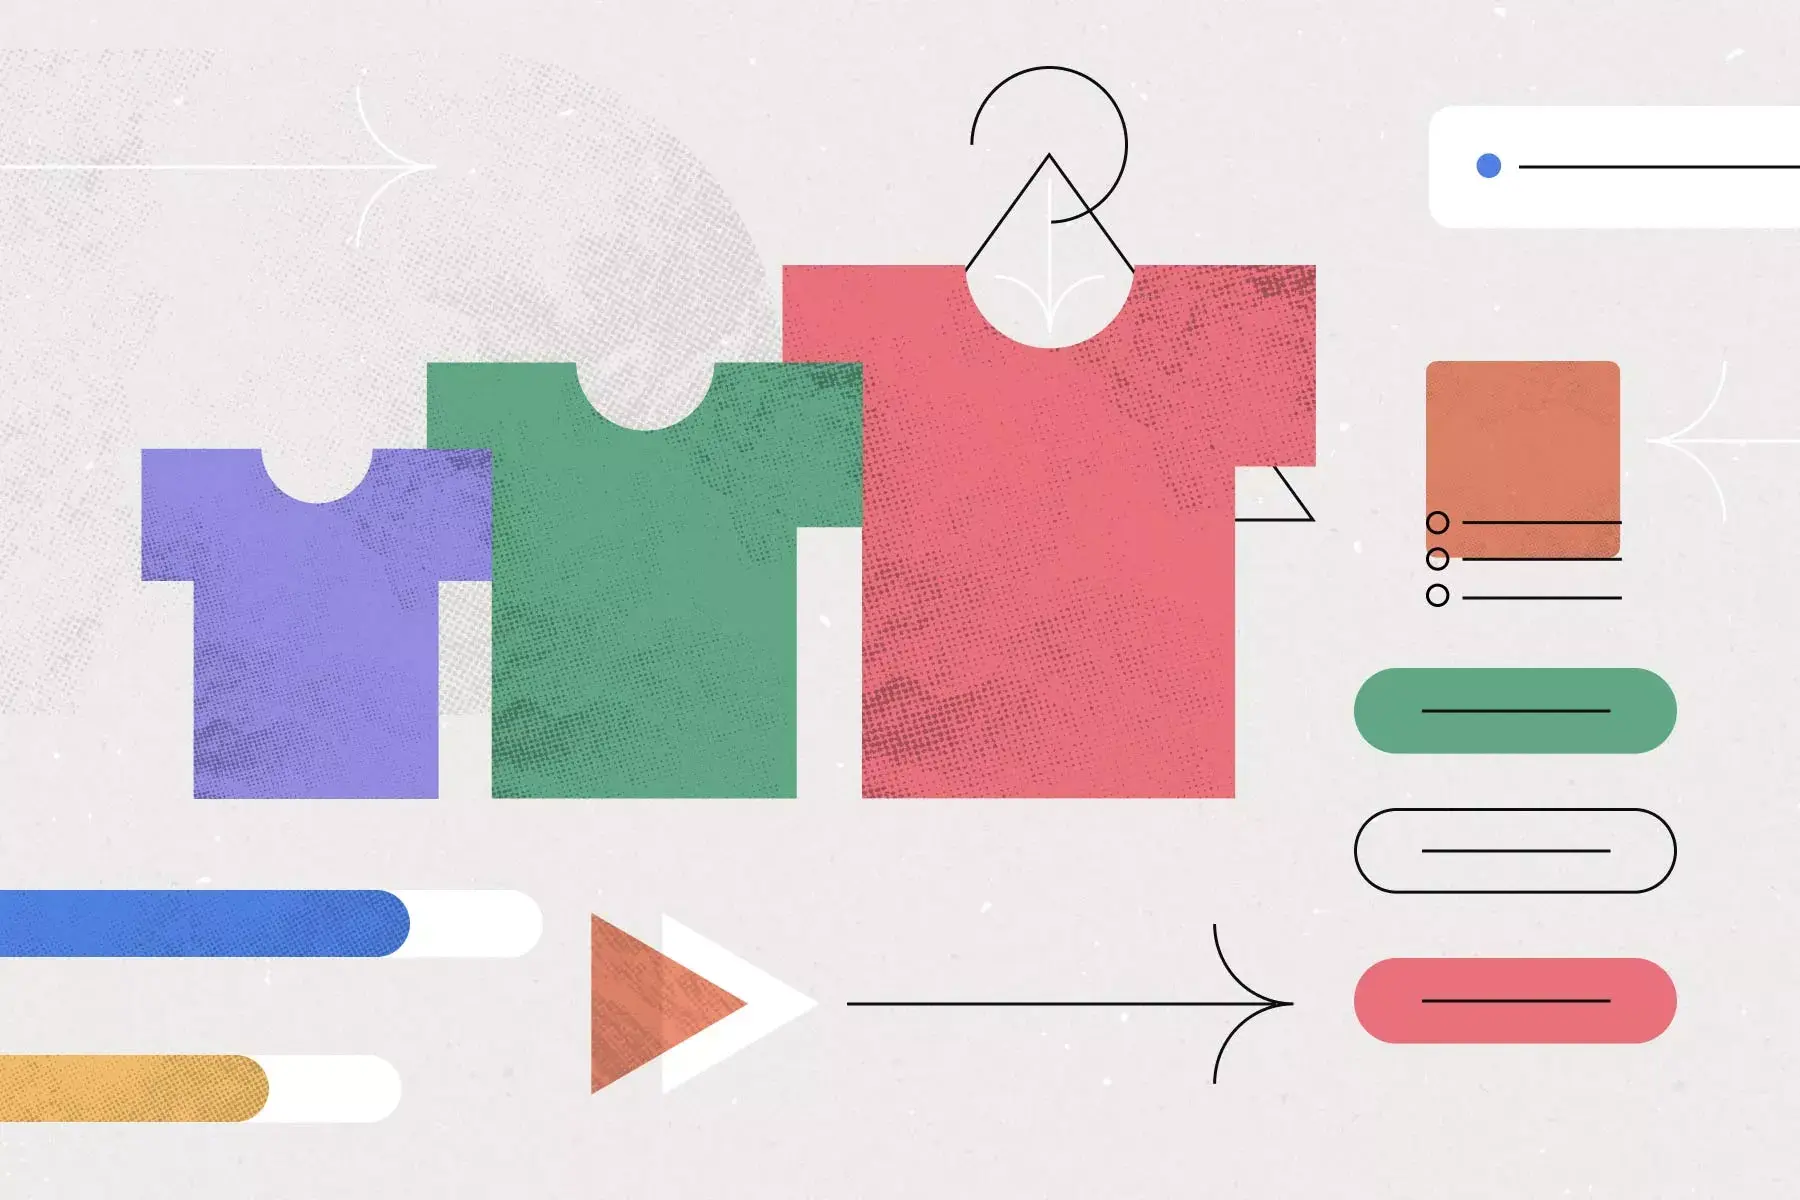 T-shirt sizes aren’t what you think: How to use t-shirt sizing for project estimation article banner image